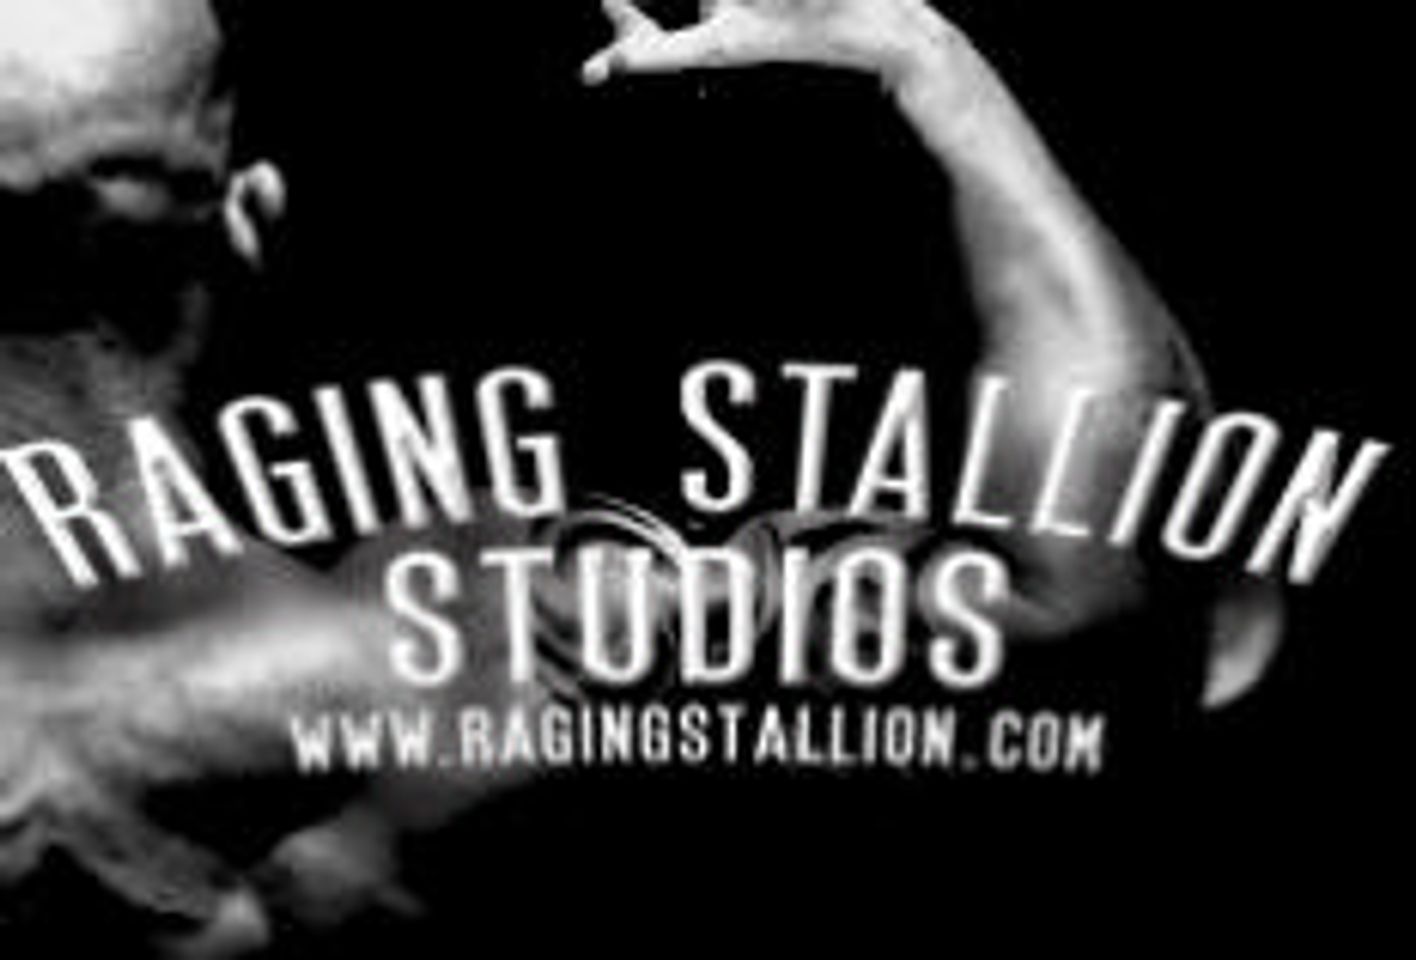 Raging Stallion Creates Youthful Offenders Line